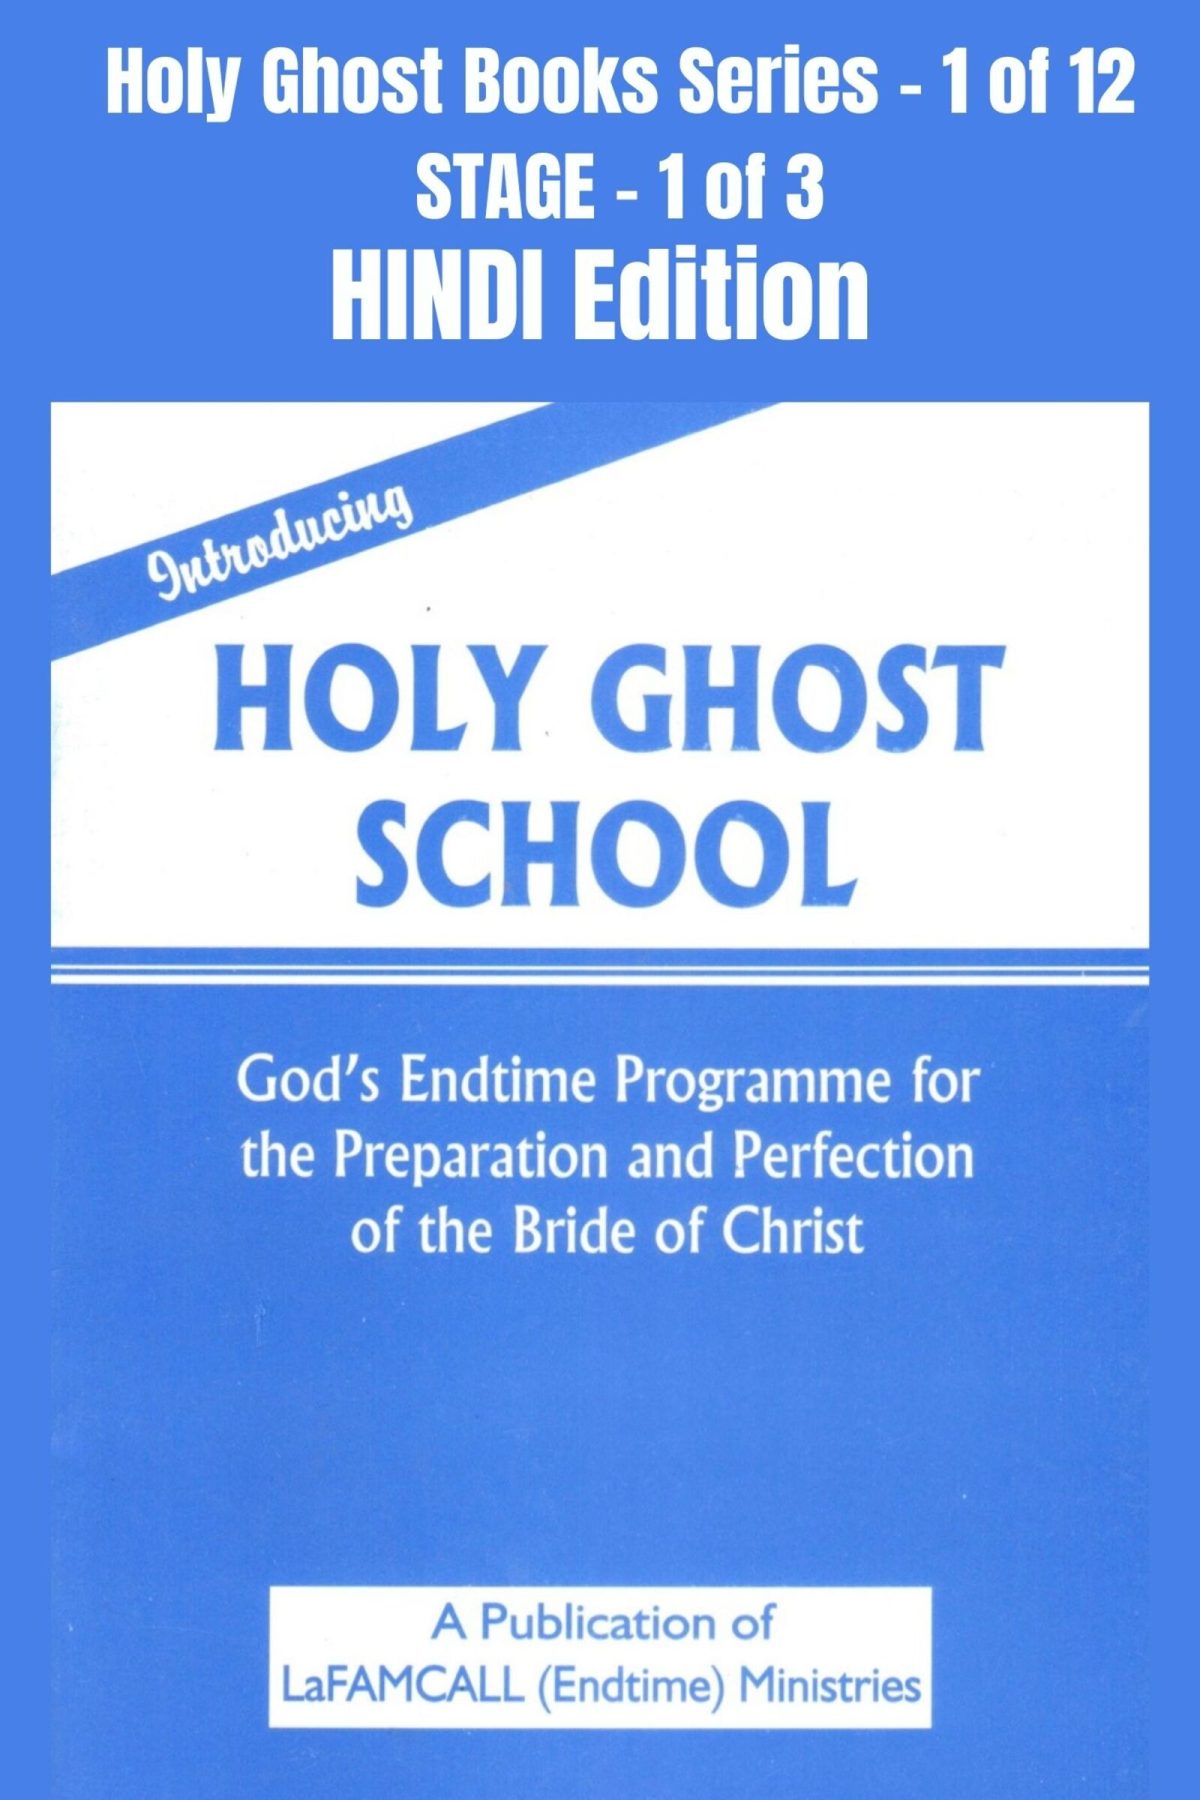 Holy Ghost School HINDI - Introducing Holy Ghost School - God's Endtime Programme for the Preparation and Perfection of the Bride of Christ - HINDI EDITION - EBOOK School of the Holy Spirit Series 1 of 12, Stage 1 of 3